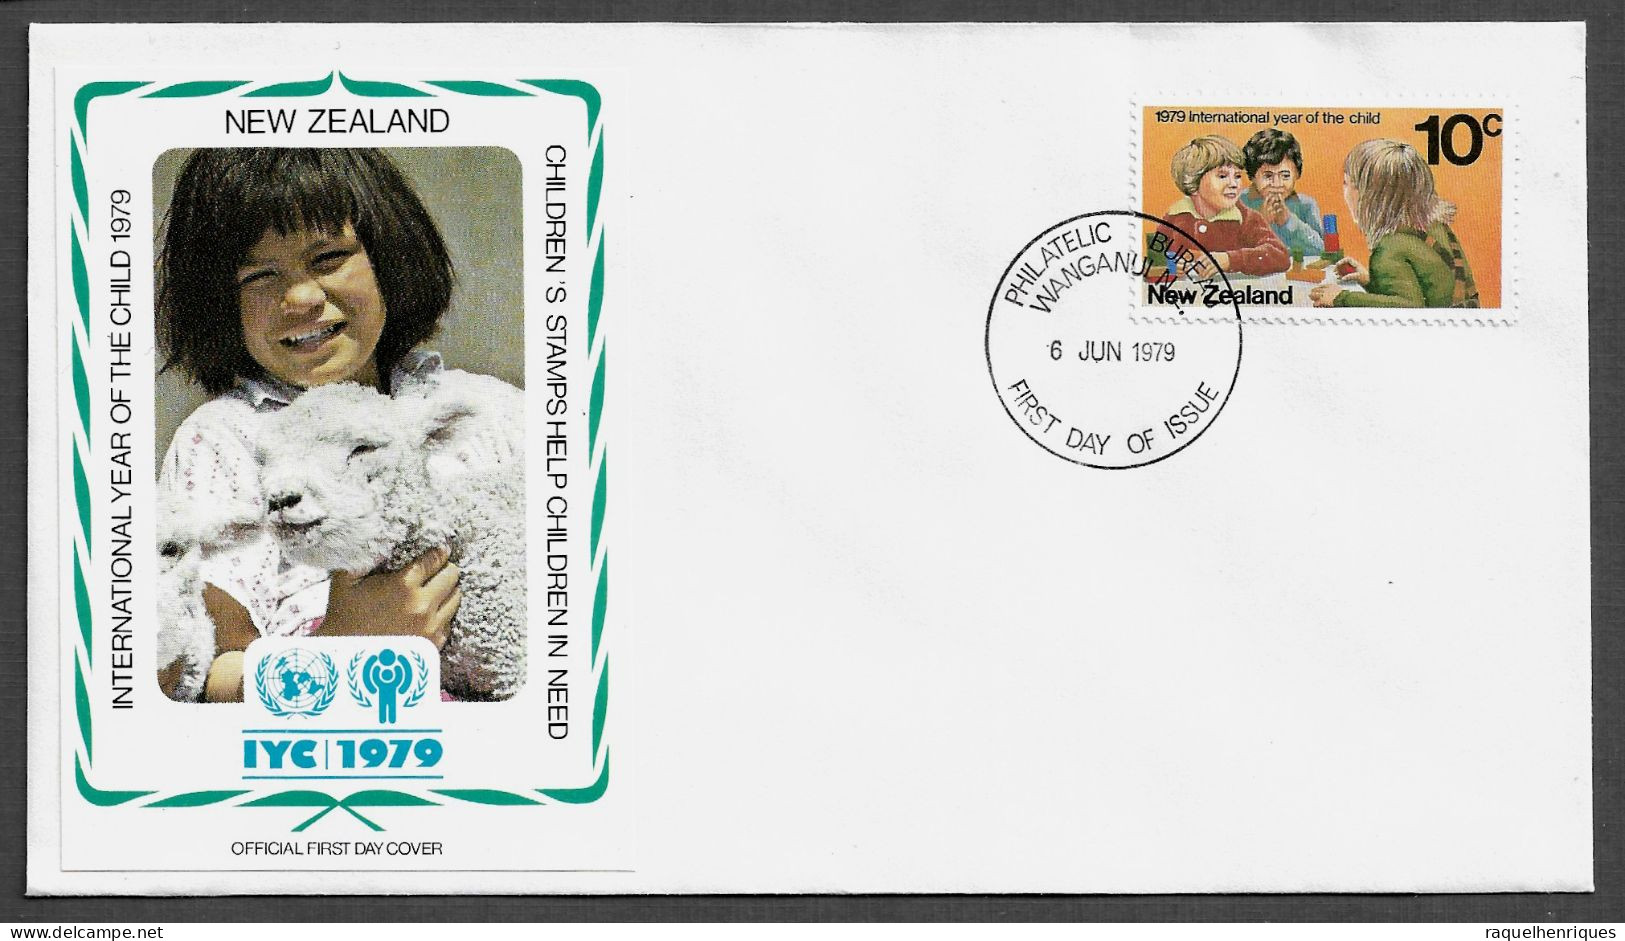 NEW ZEALAND FDC COVER - 1979 International Year Of The Child SET FDC (FDC79#07) - Covers & Documents